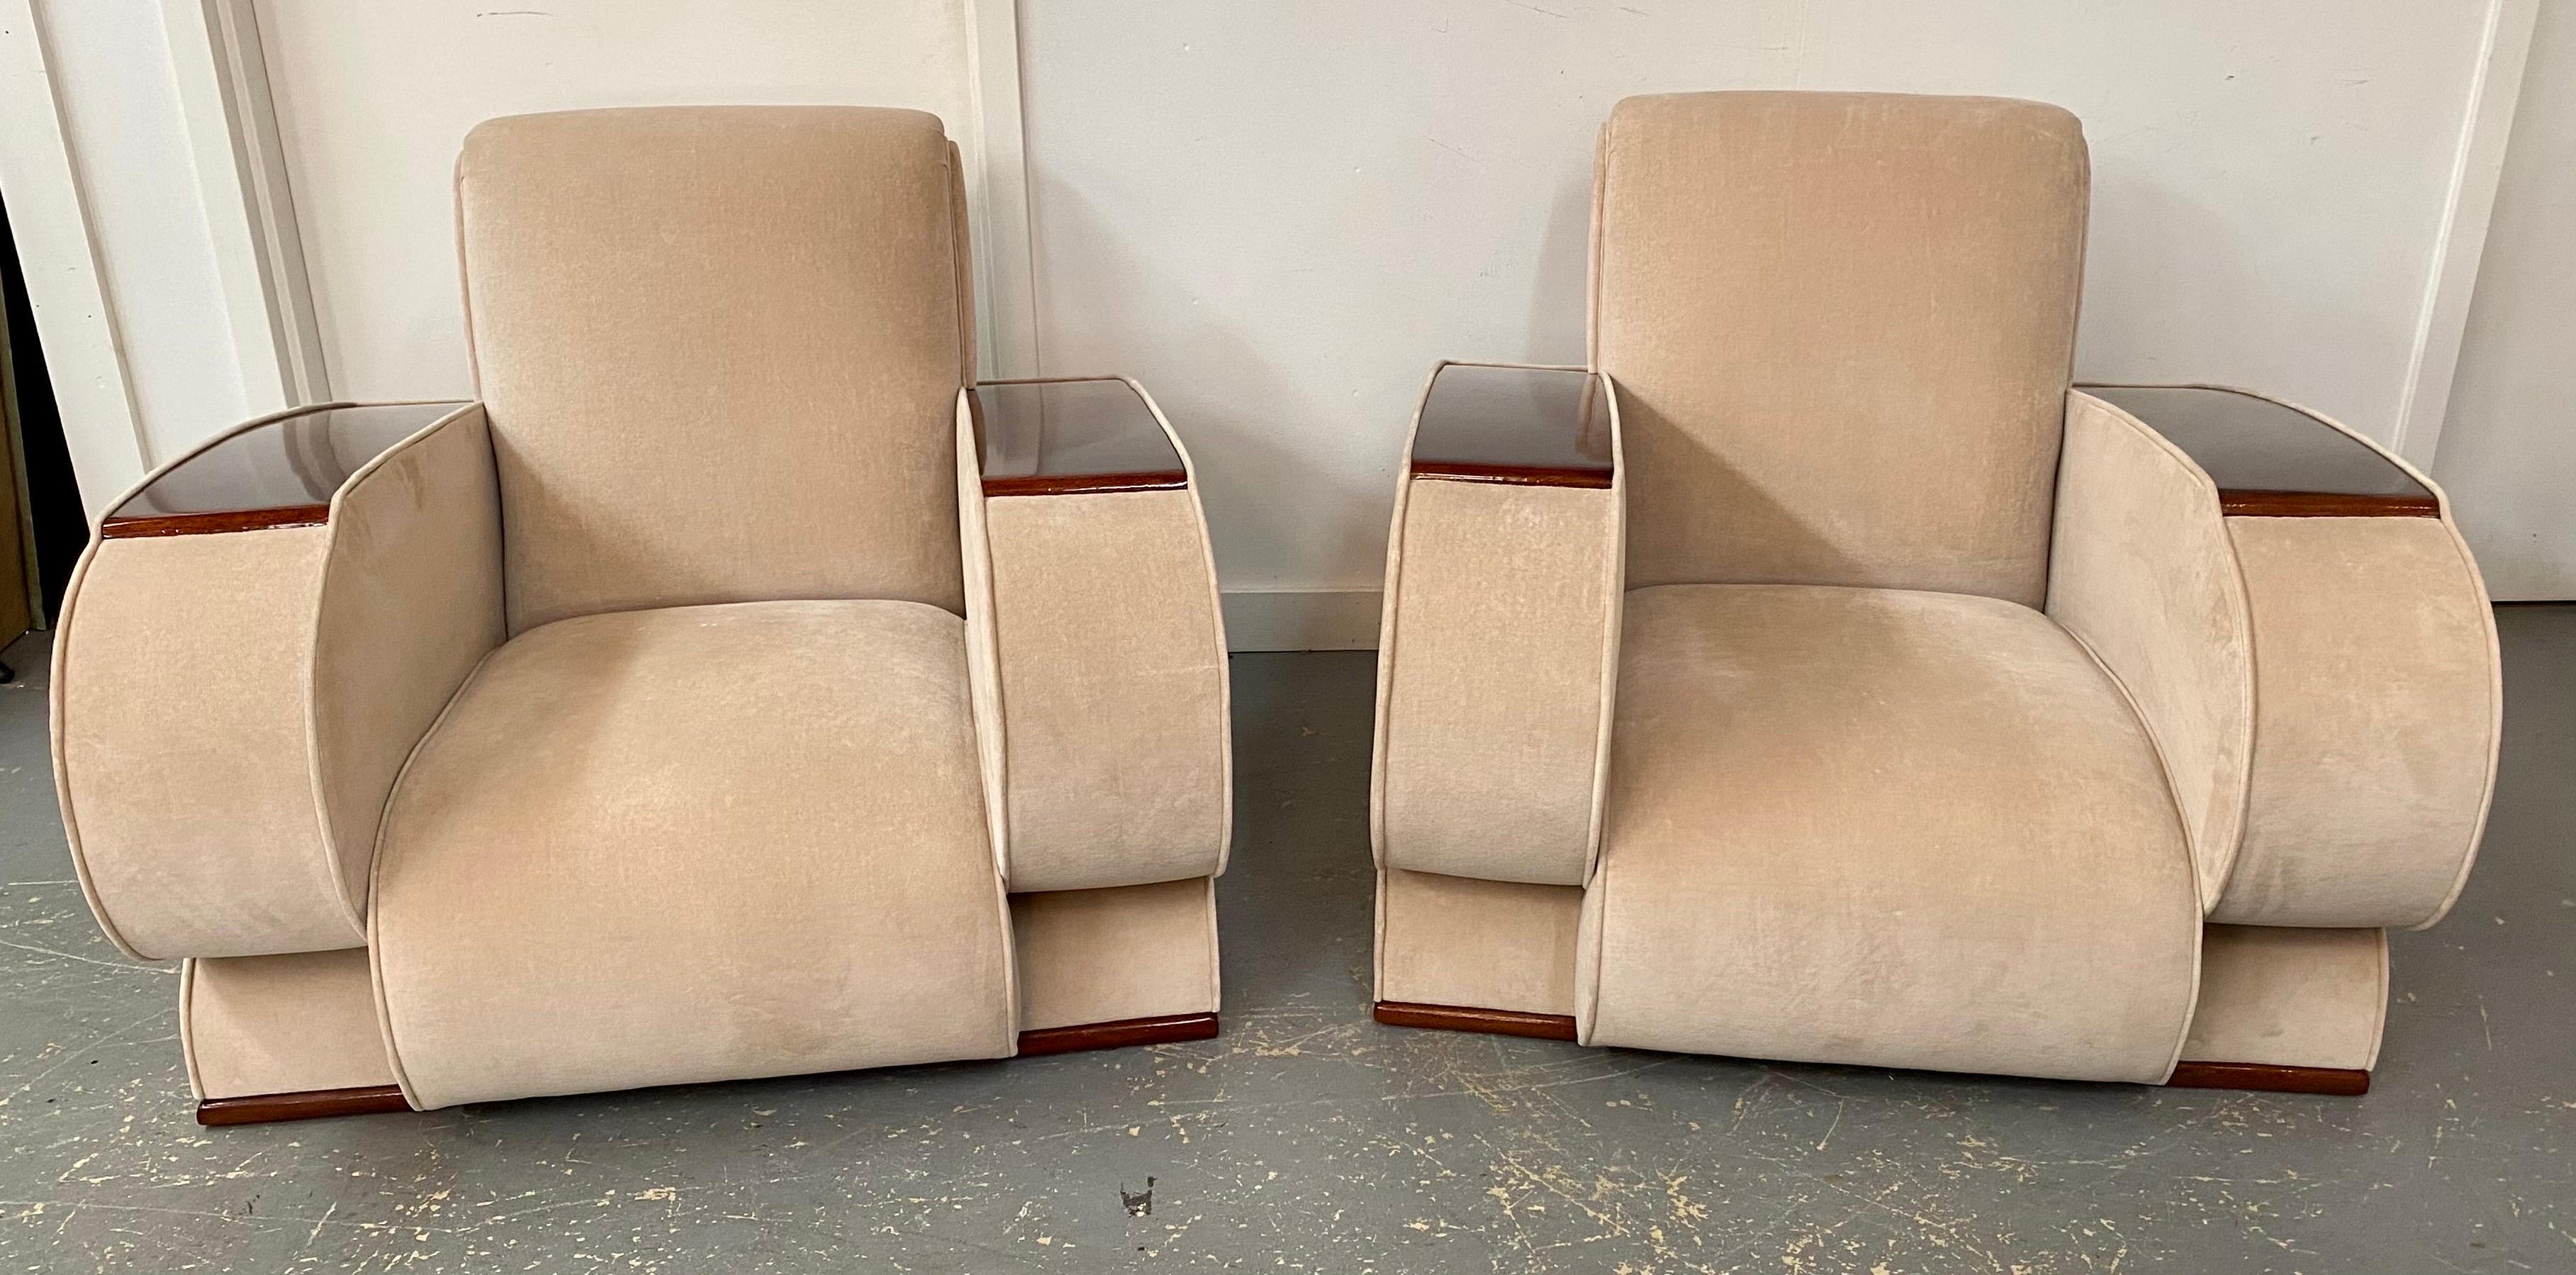 A pair of French Art Deco lounge or club chairs. These distinguished seats, resplendent in their design, exude an air of refined luxury that epitomizes the Art Deco aesthetic.
The upholstery, a sumptuous suede rendered in a tasteful shade of beige,